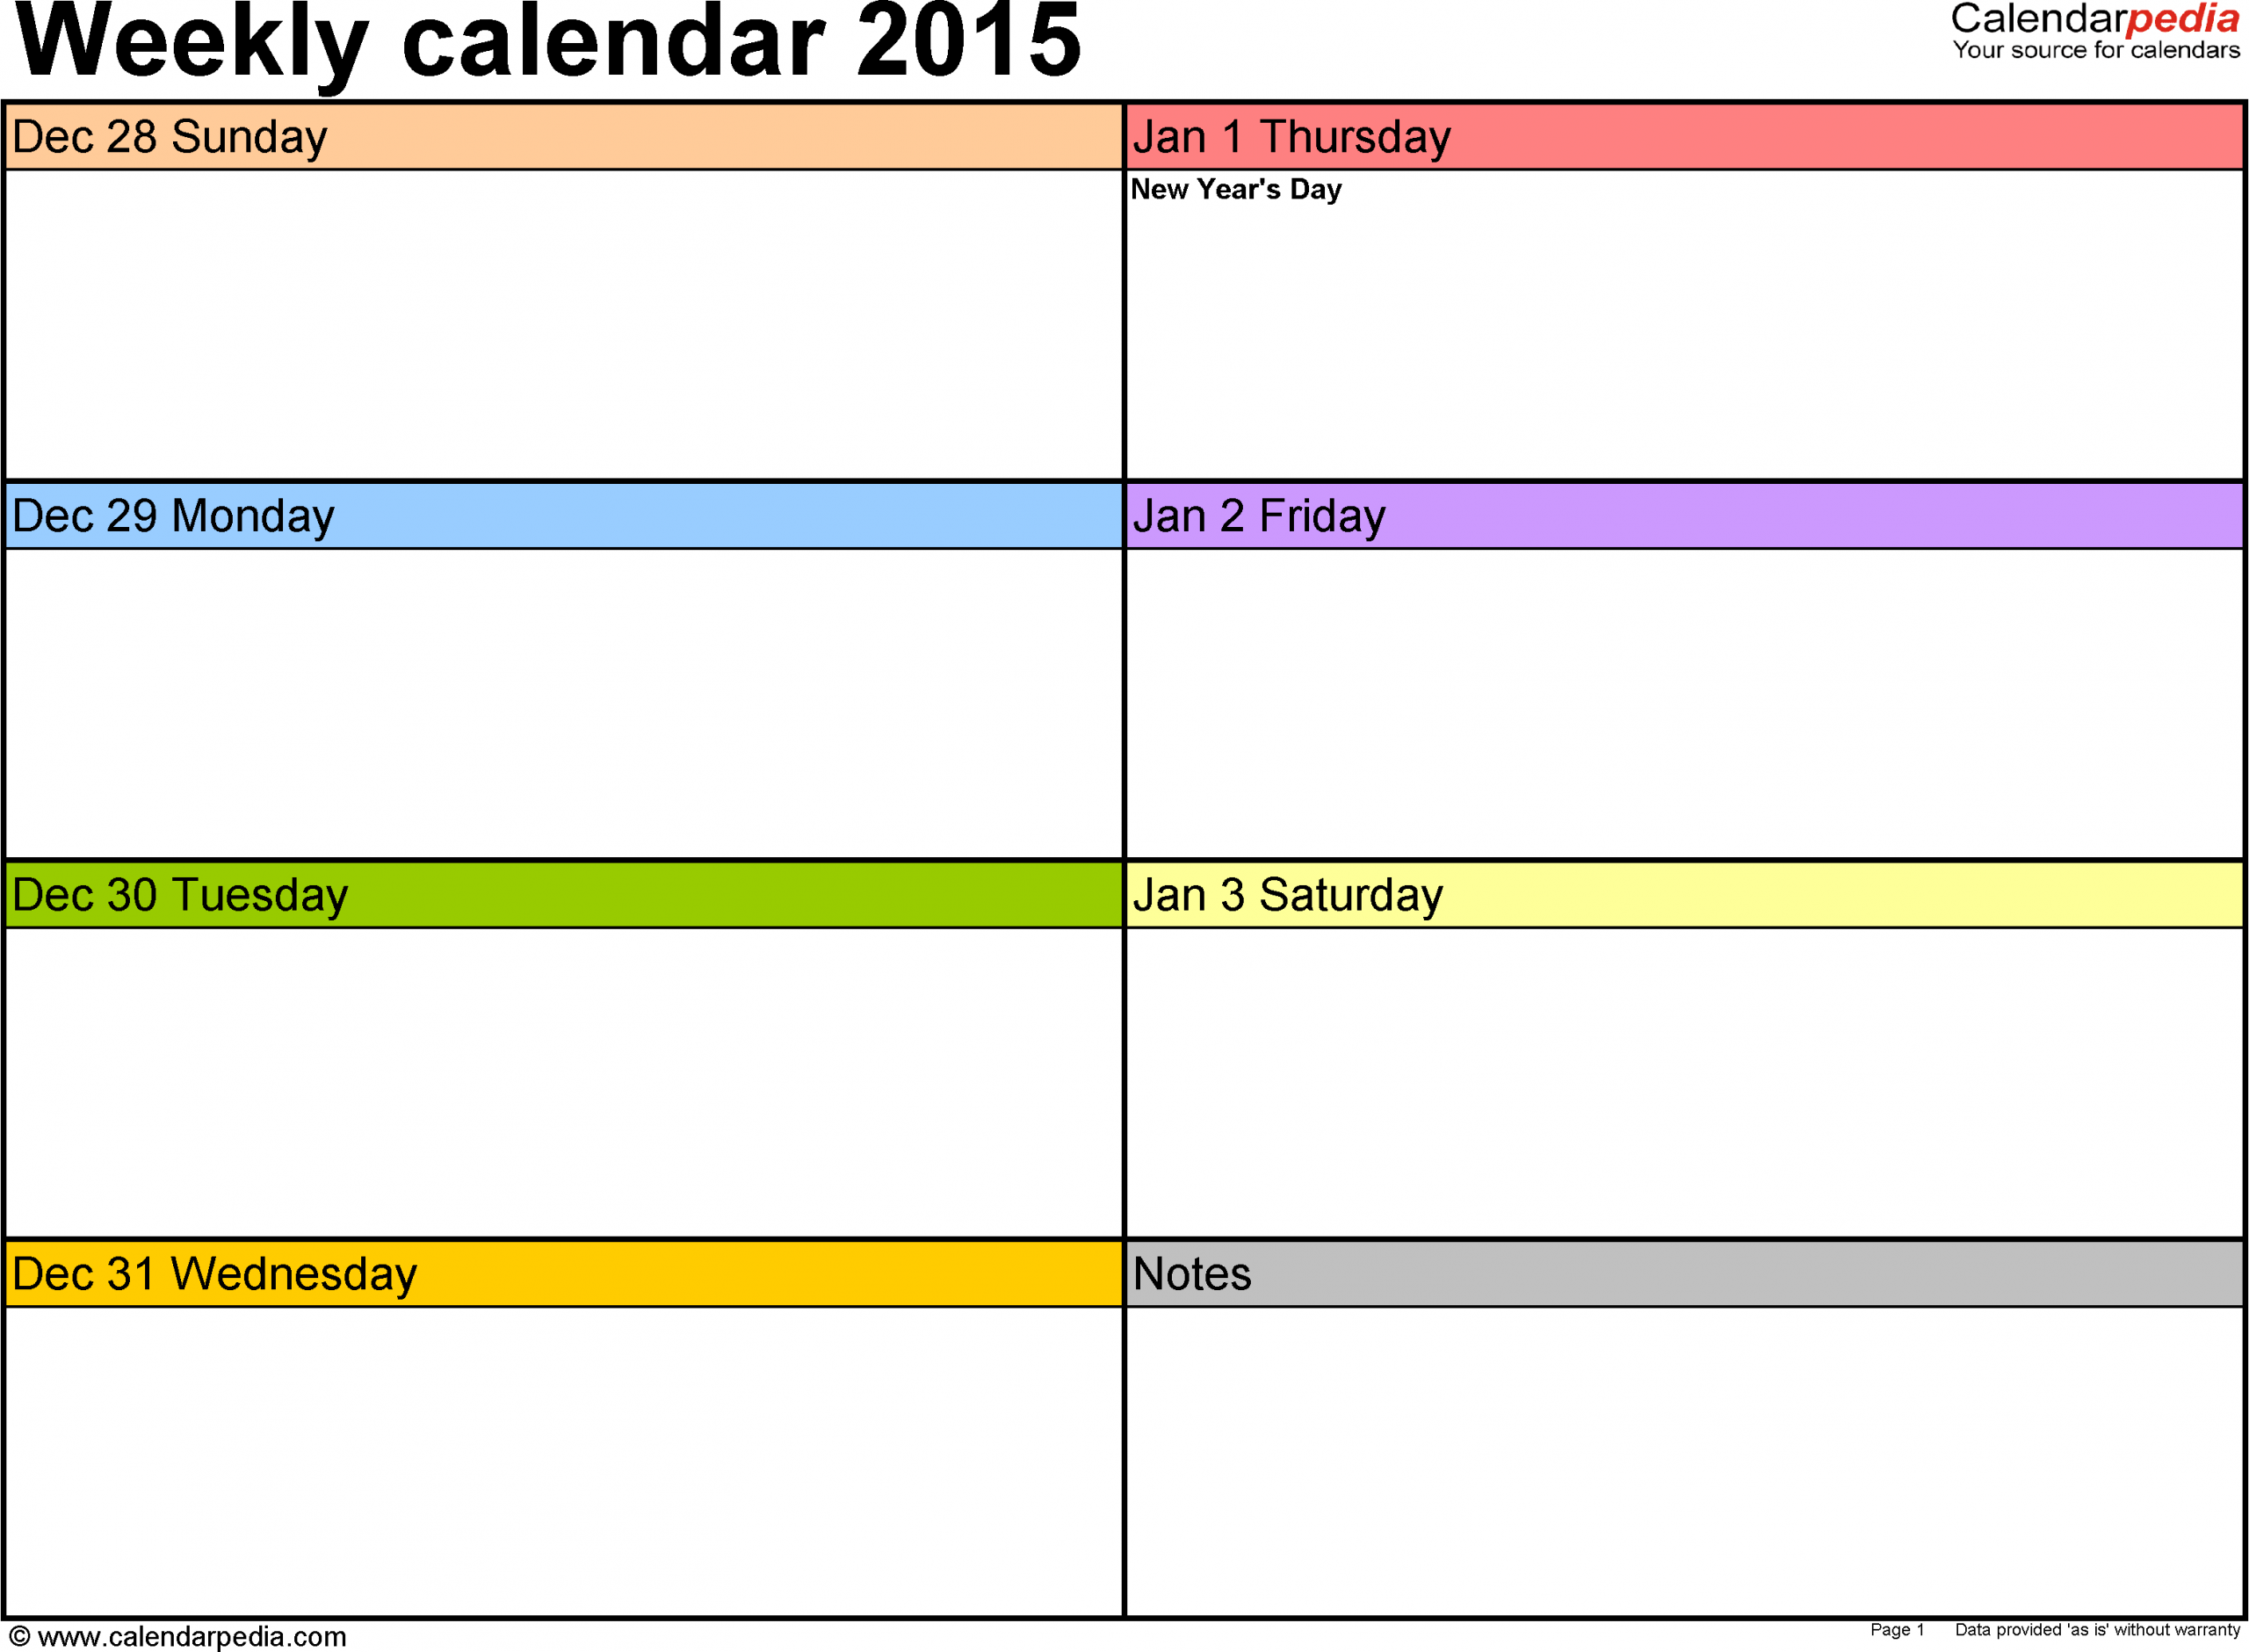 Weekly Calendars 2015 For Pdf 12 Free Printable Templates 1